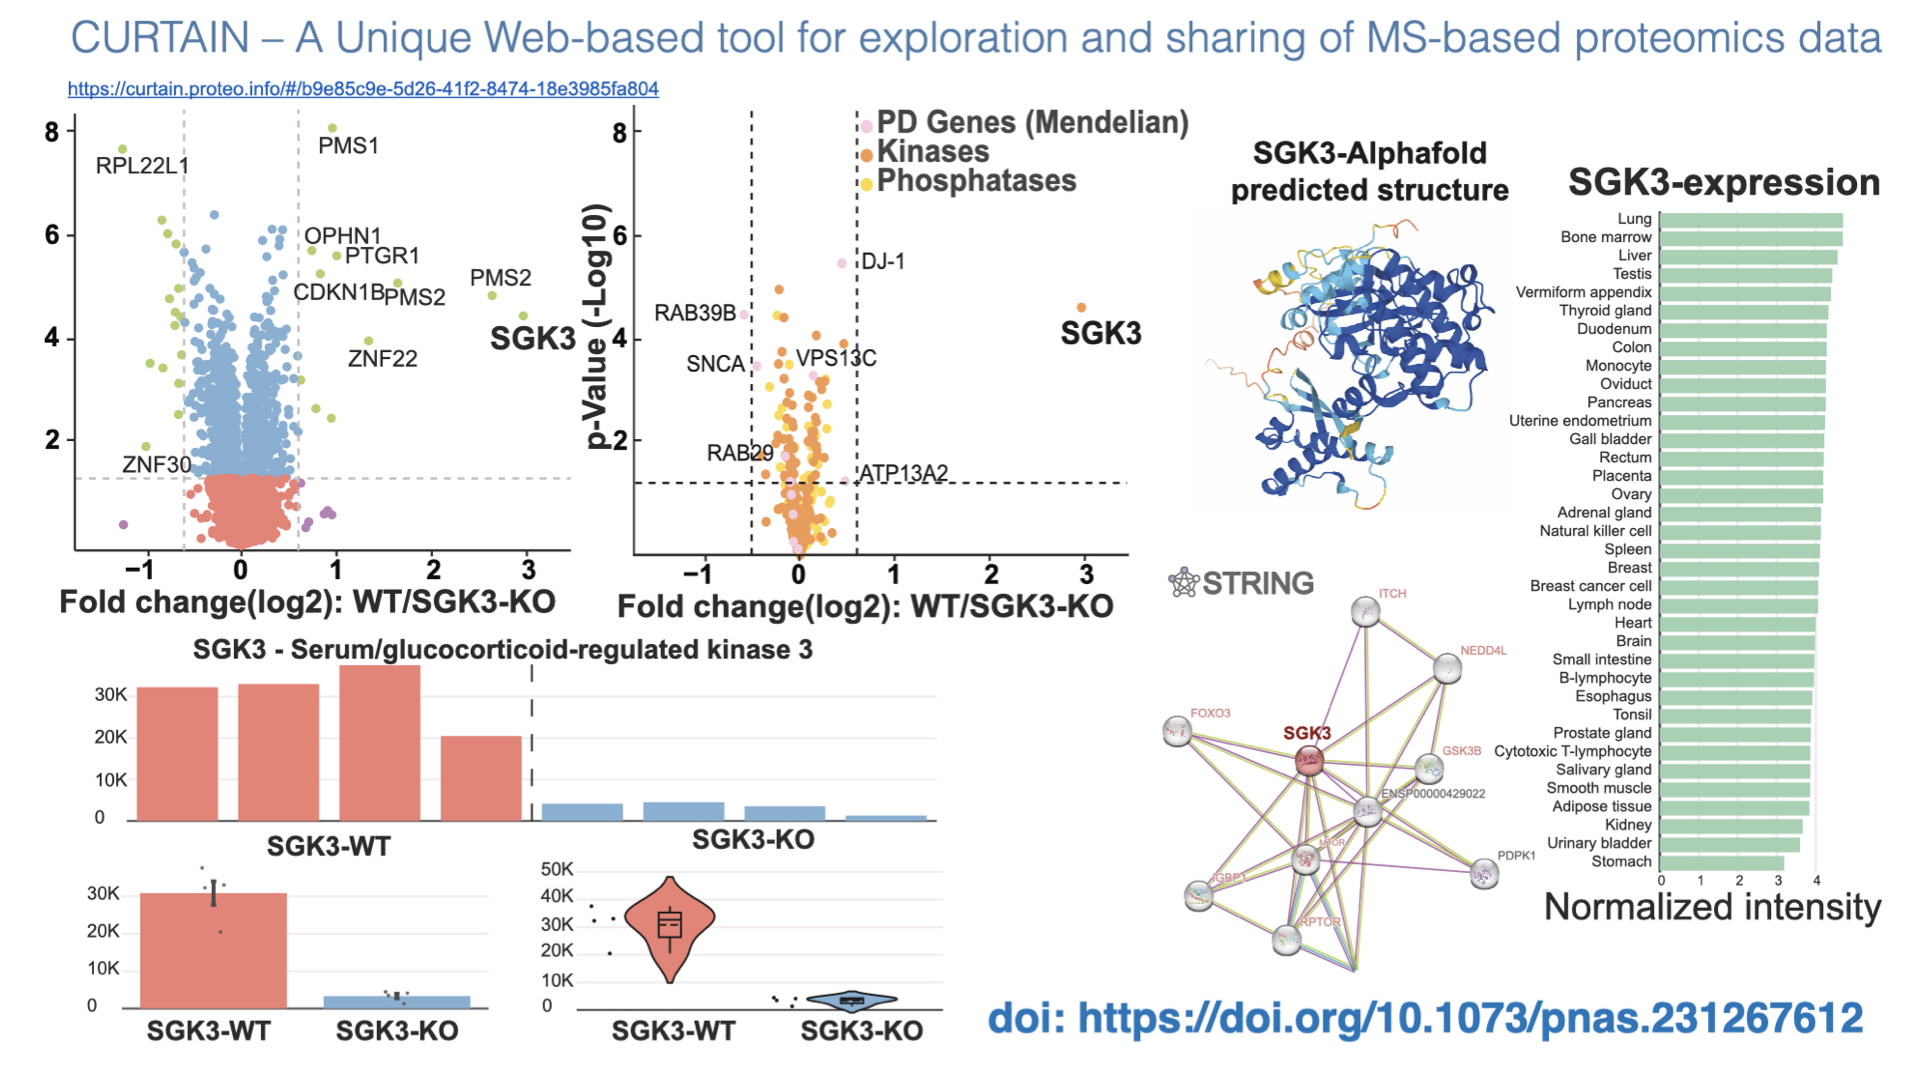 Curatin a unique web based tool for exploration and sharing of MS-based proteomics data